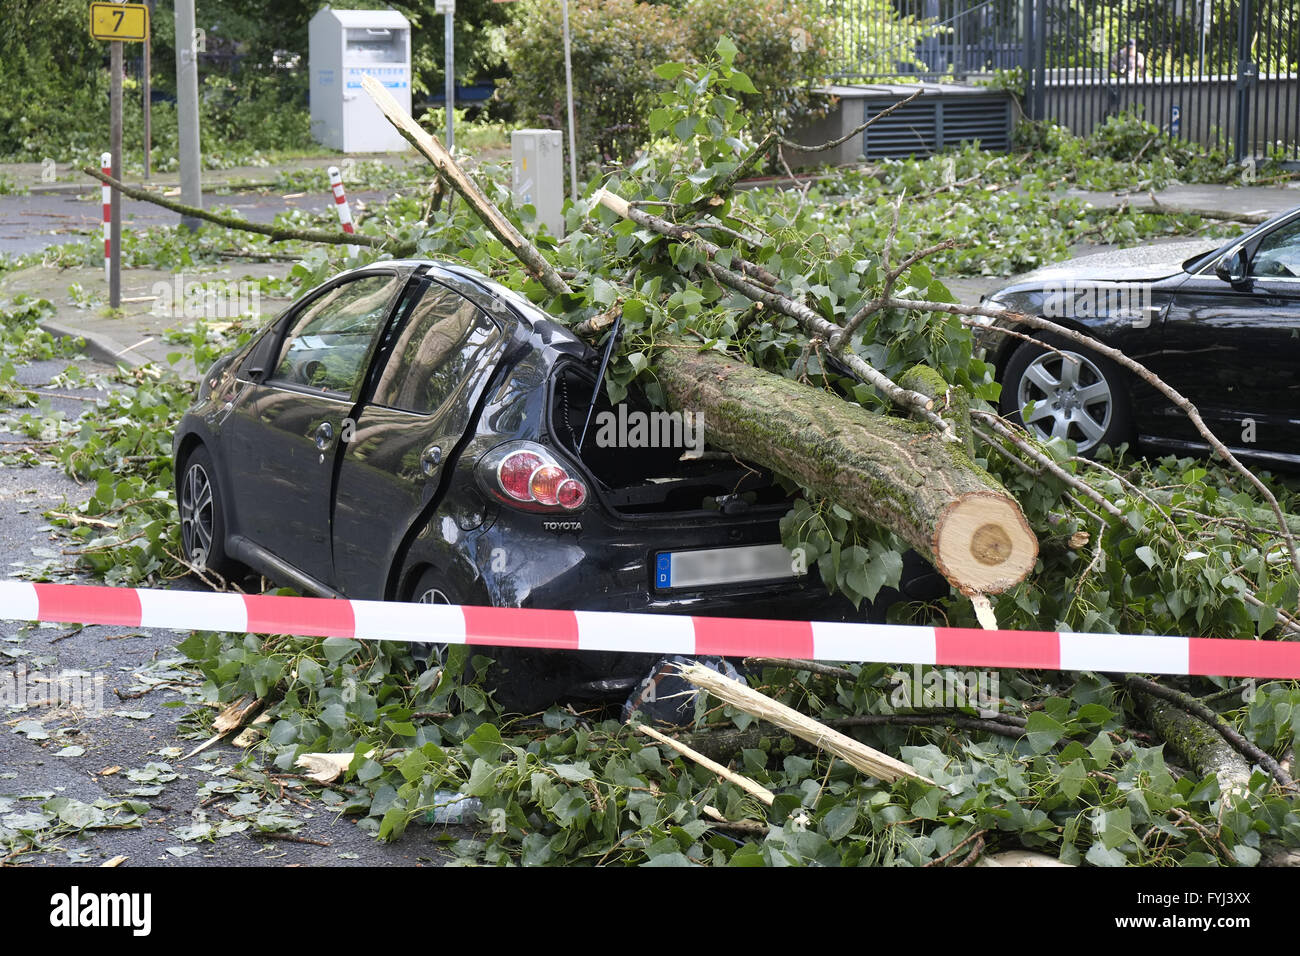 Car wreck damaged by a tree trunk Stock Photo